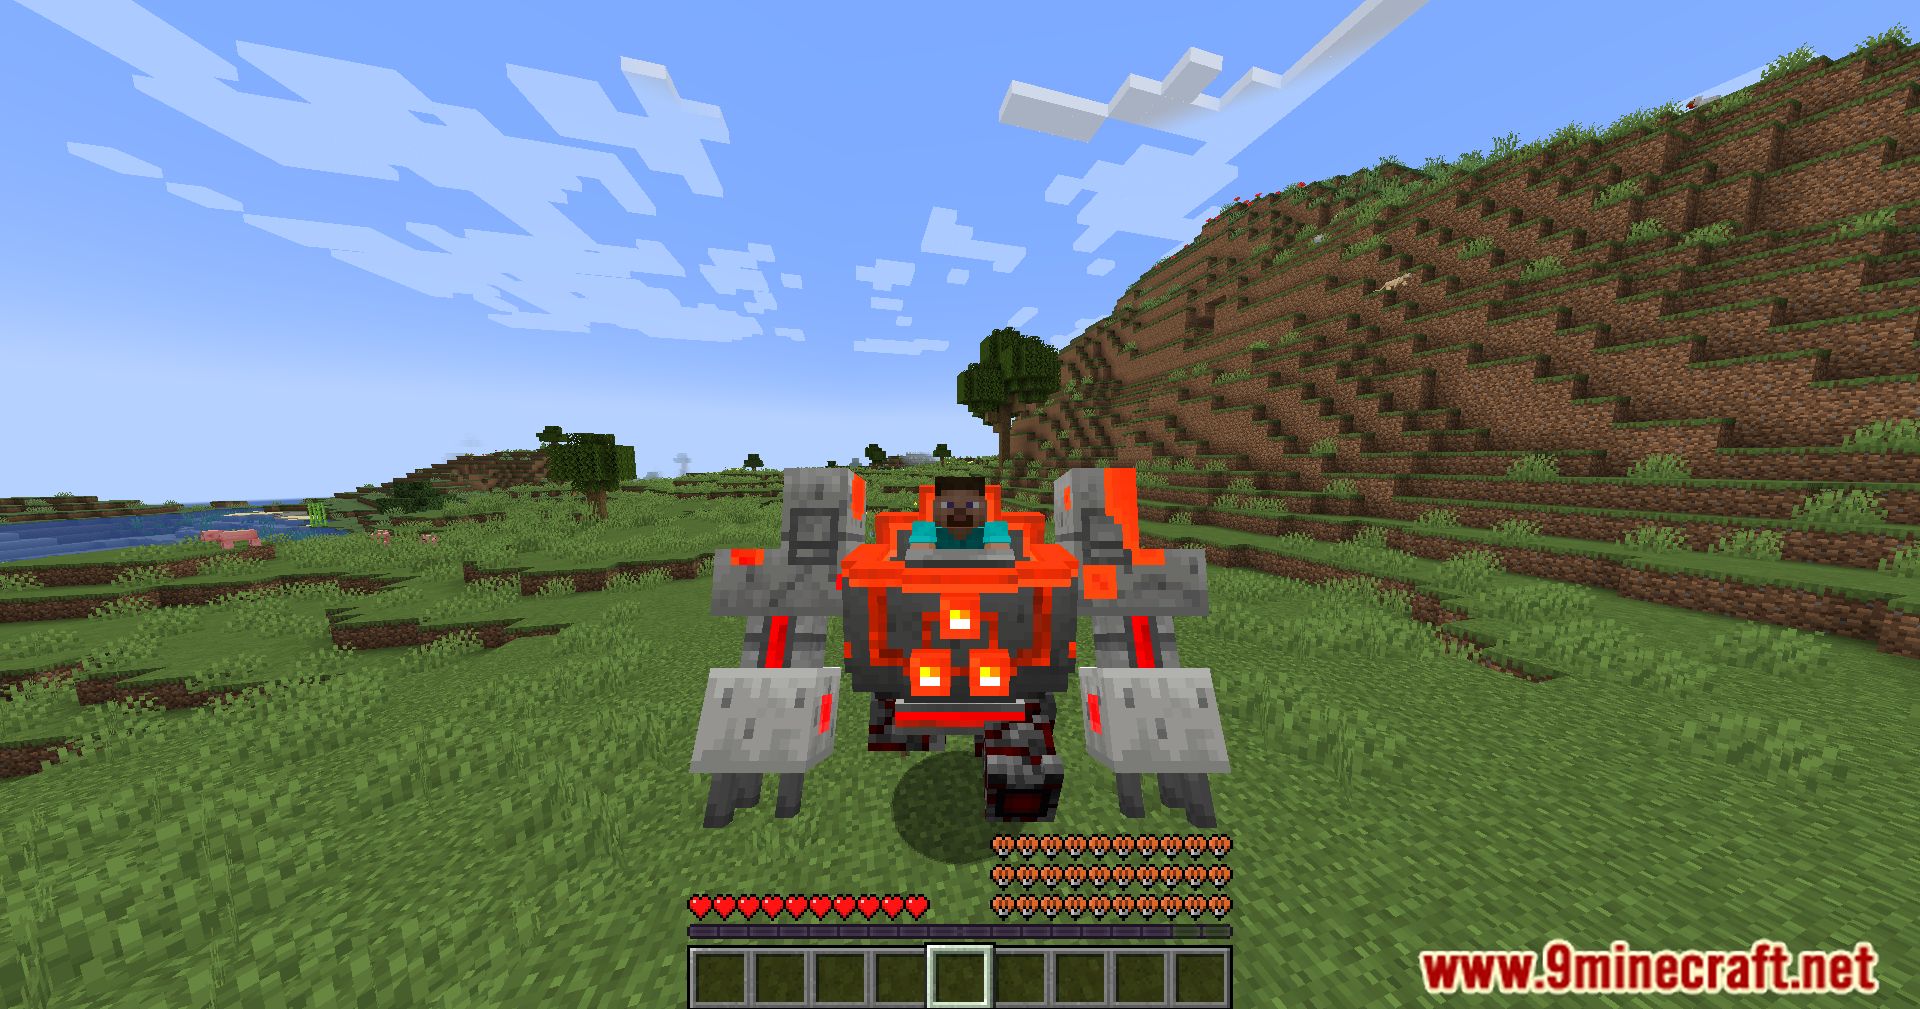 Armored Redstone Mod (1.20.1, 1.19.3) - Forge Your Path With Redstone-Powered Adventures! 12